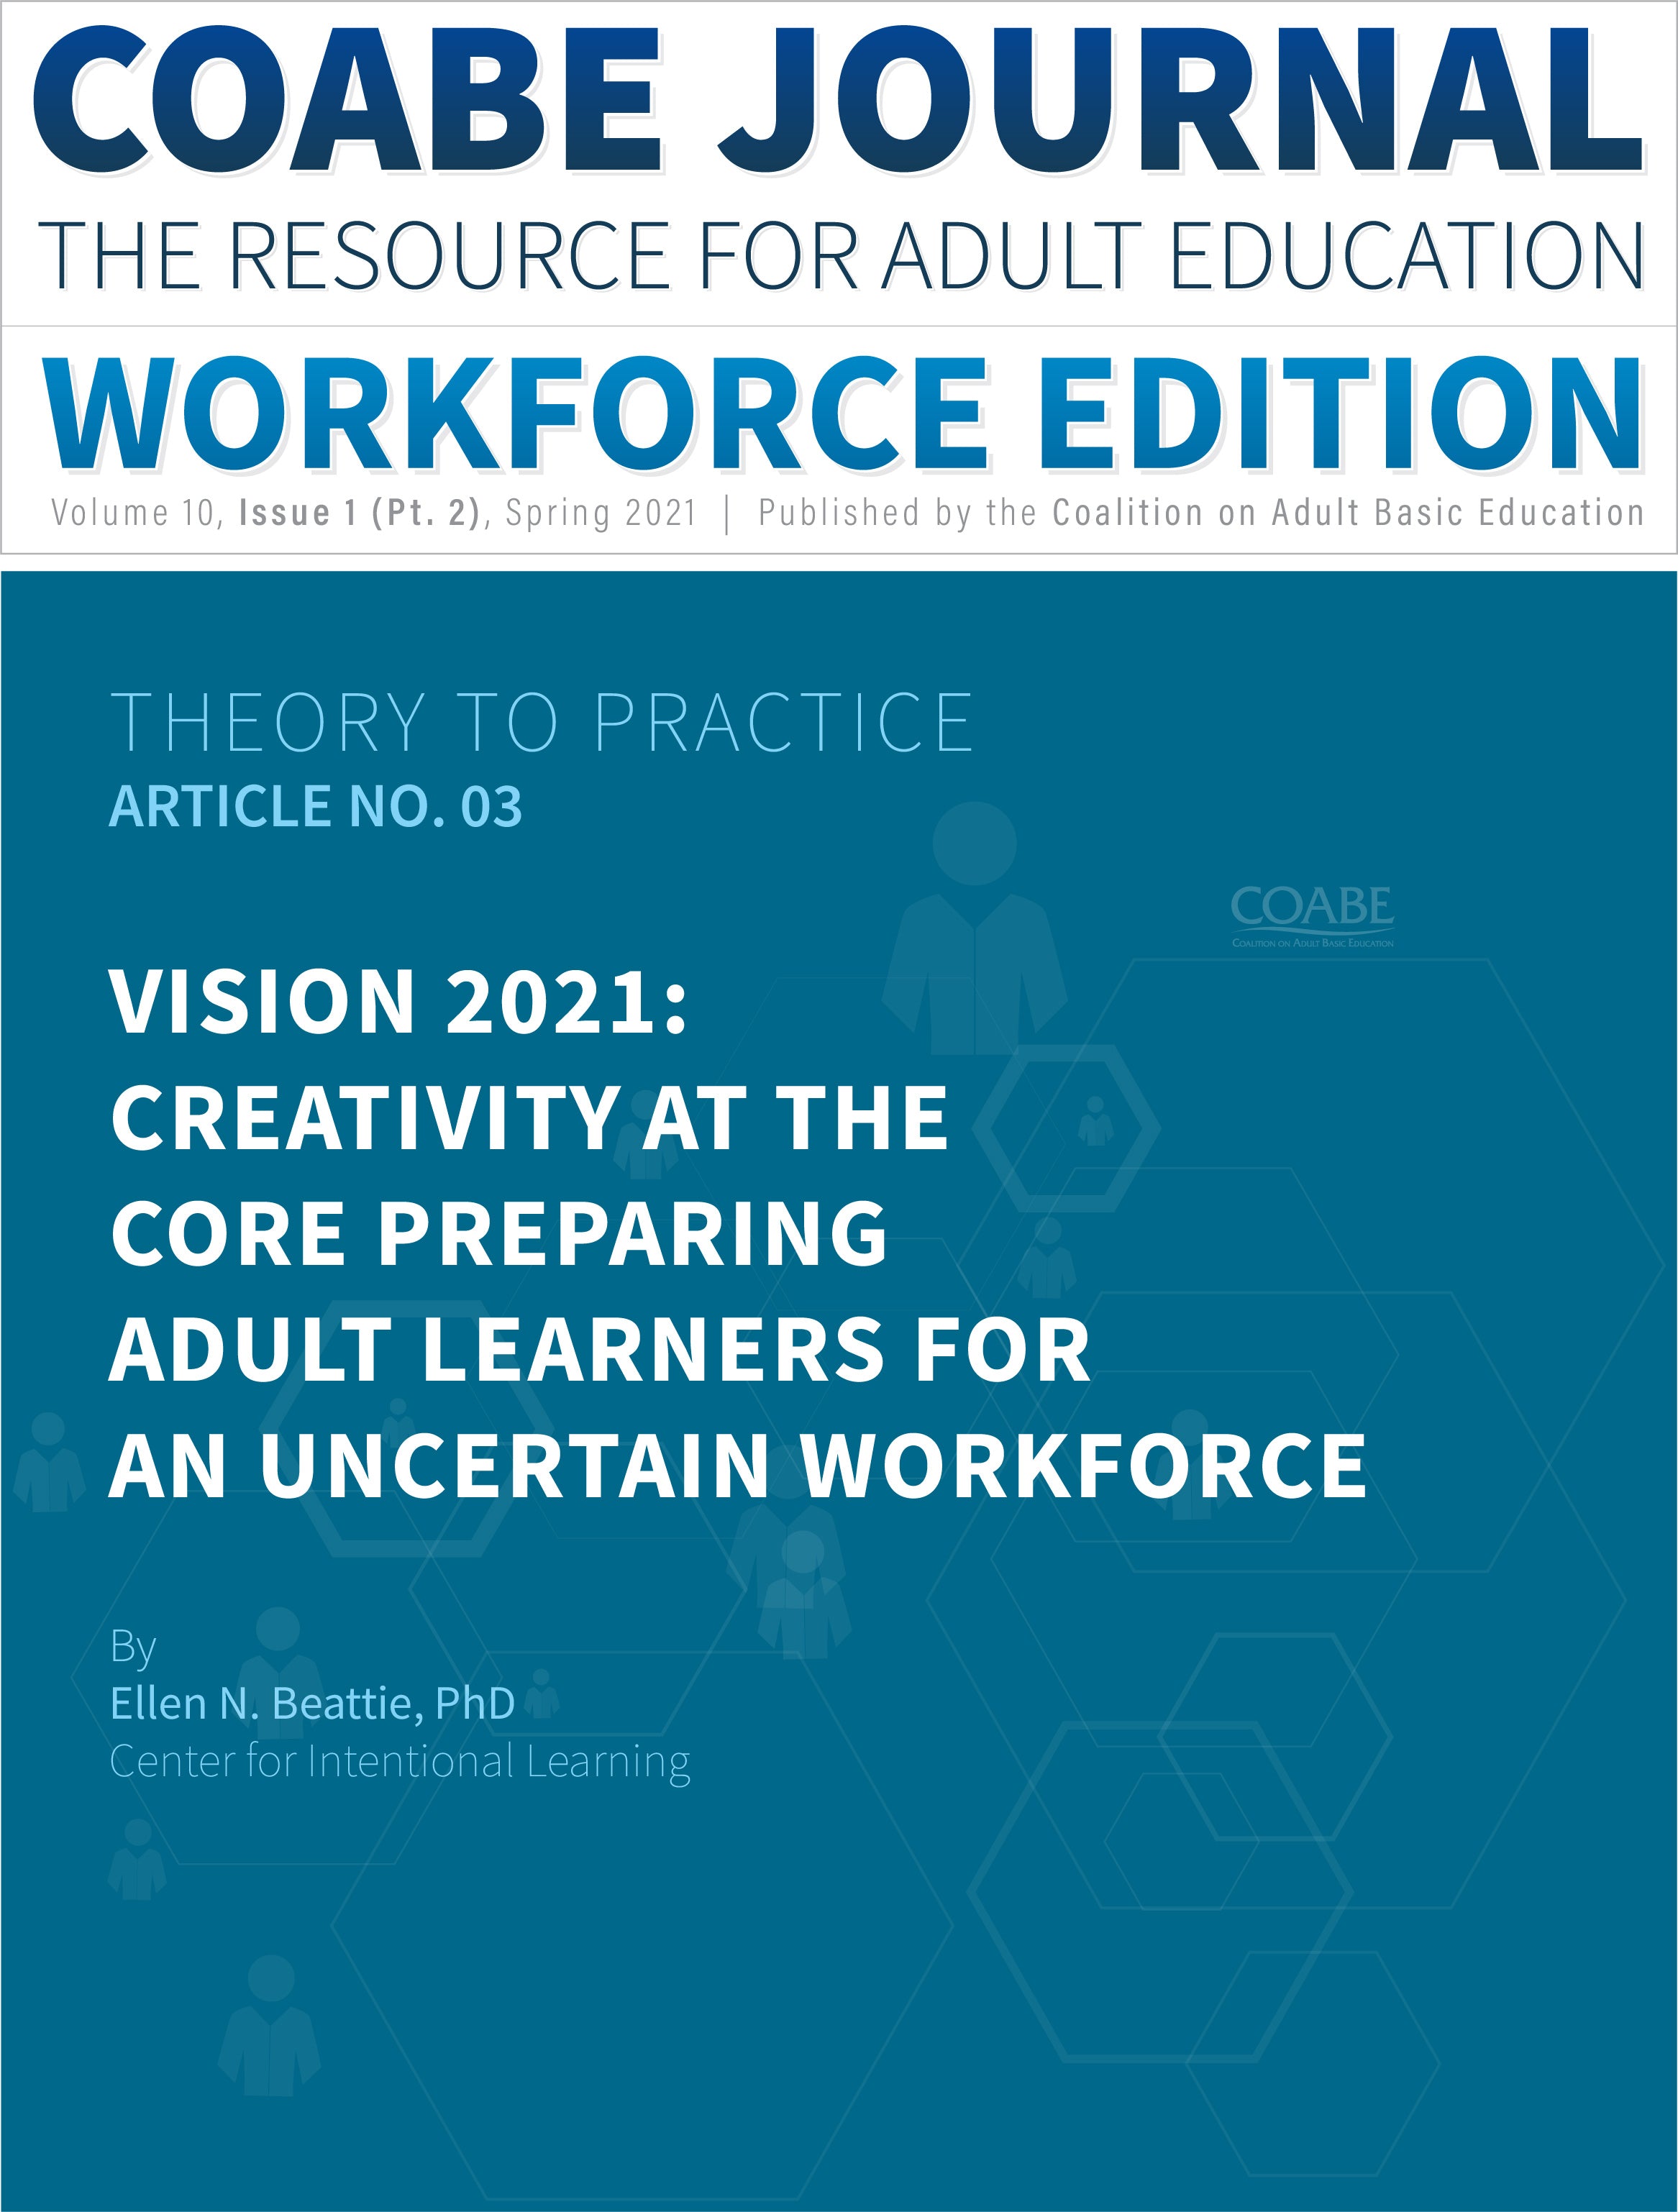 Article 03 :: Vision 2021: Creativity At The Core Preparing Adult Learners For An Uncertain Workforce